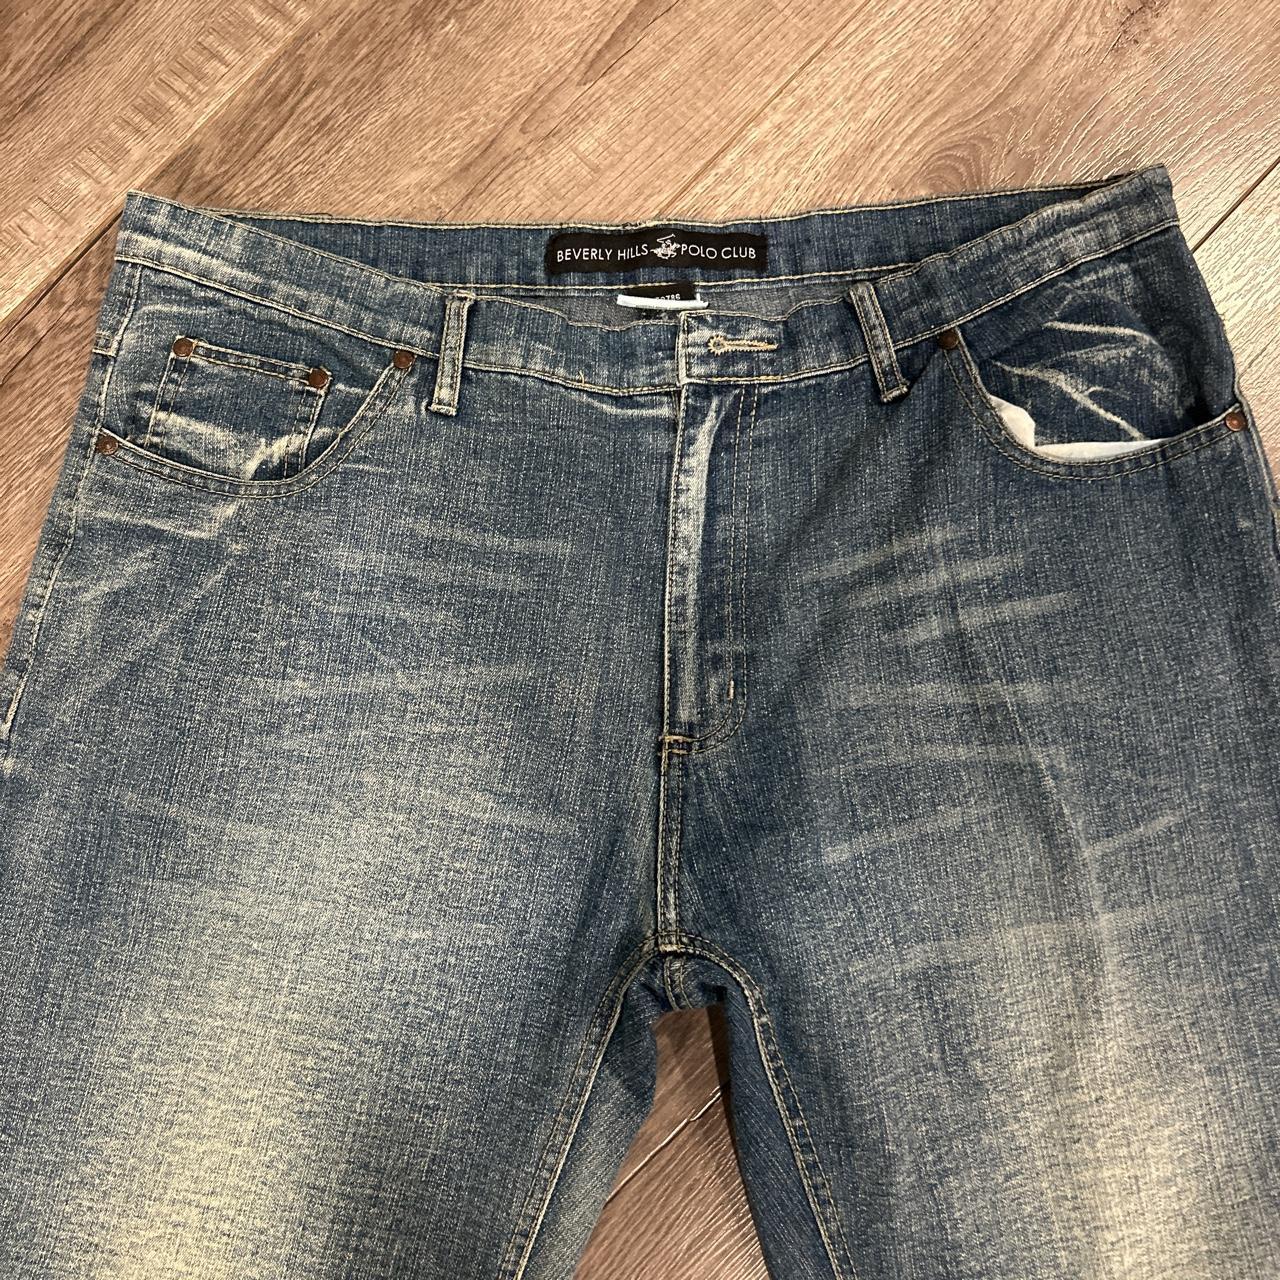 VINTAGE BEVERLY HILLS POLO CLUB JEANS Size... - Depop